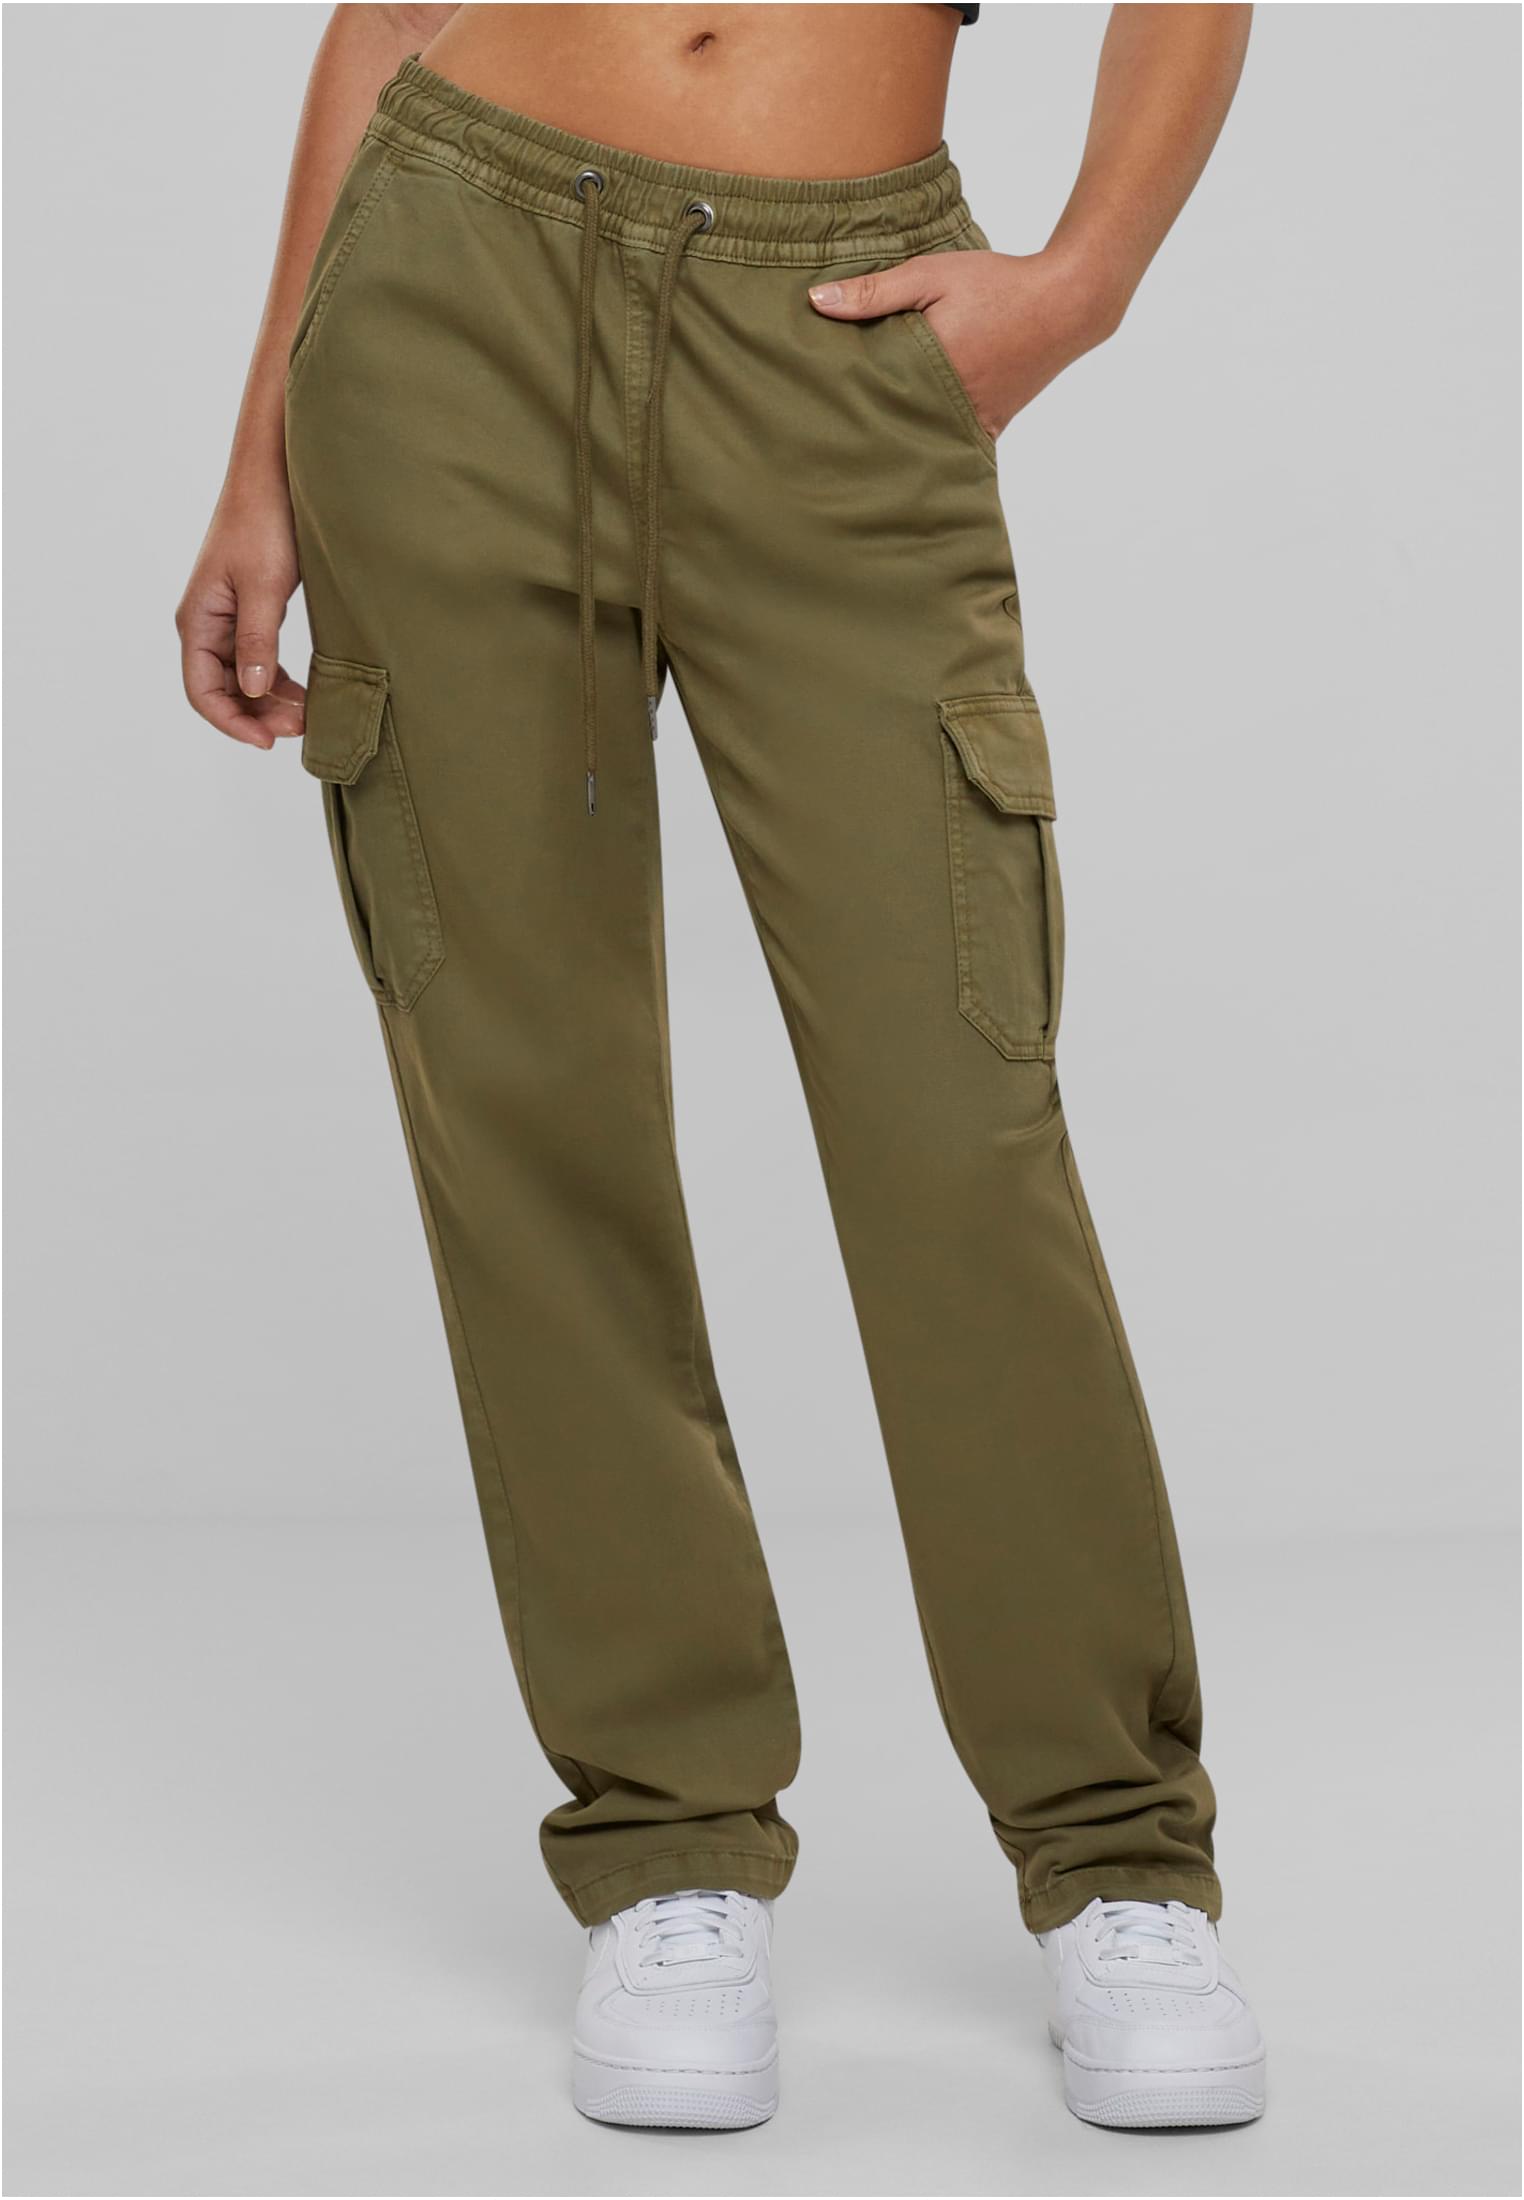 Women's high-waisted twill trousers Cargo Tiniolive